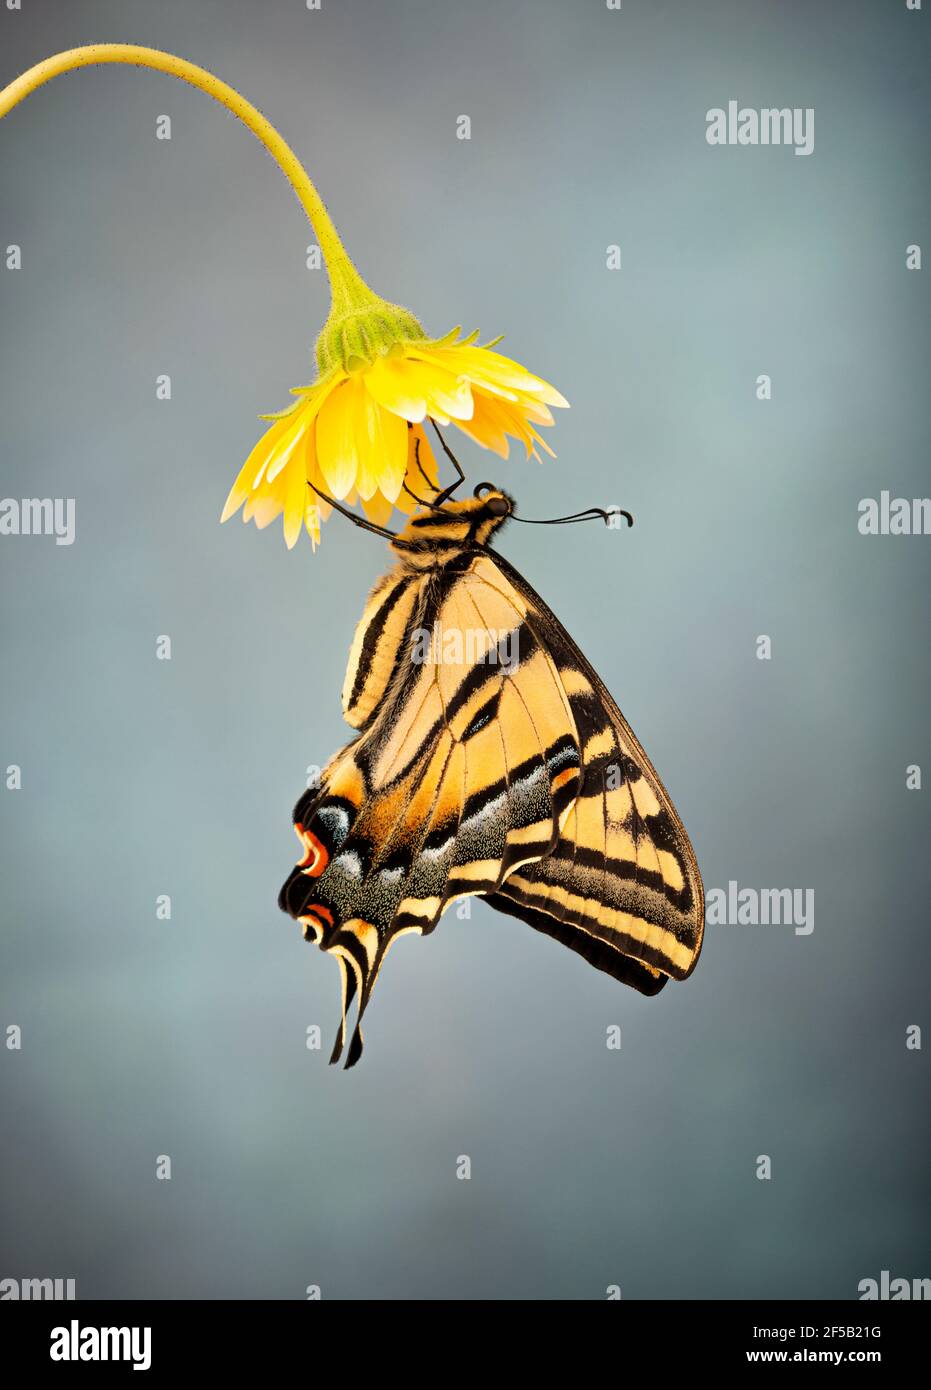 A Western Tiger Swallowtail (Papilio rutulus) hanging from a yellow flower - side view - on a blue grey background Stock Photo